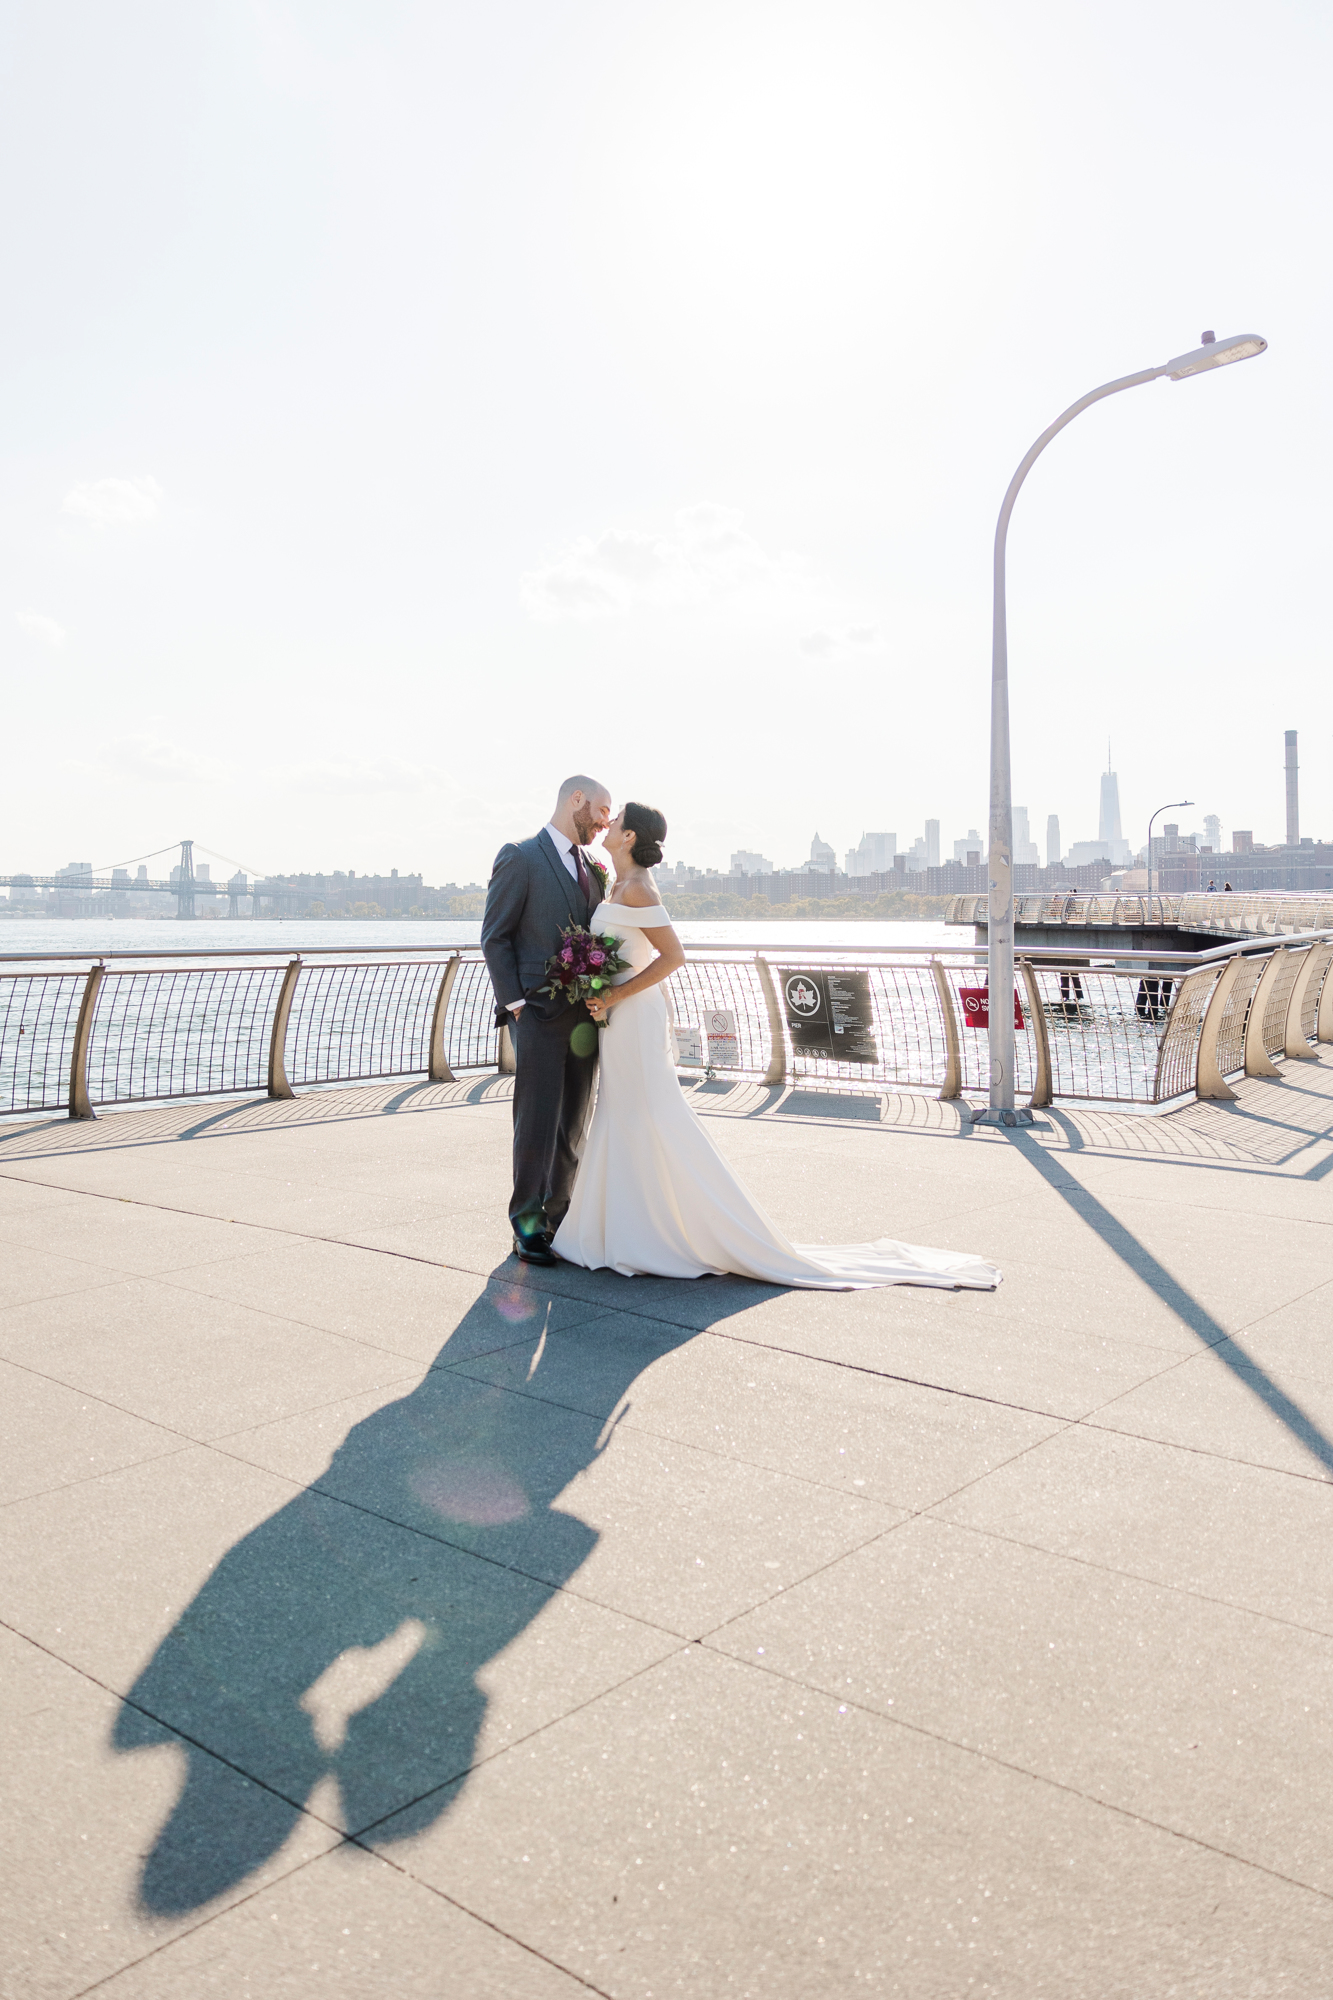 Special Elopement Photos in New York